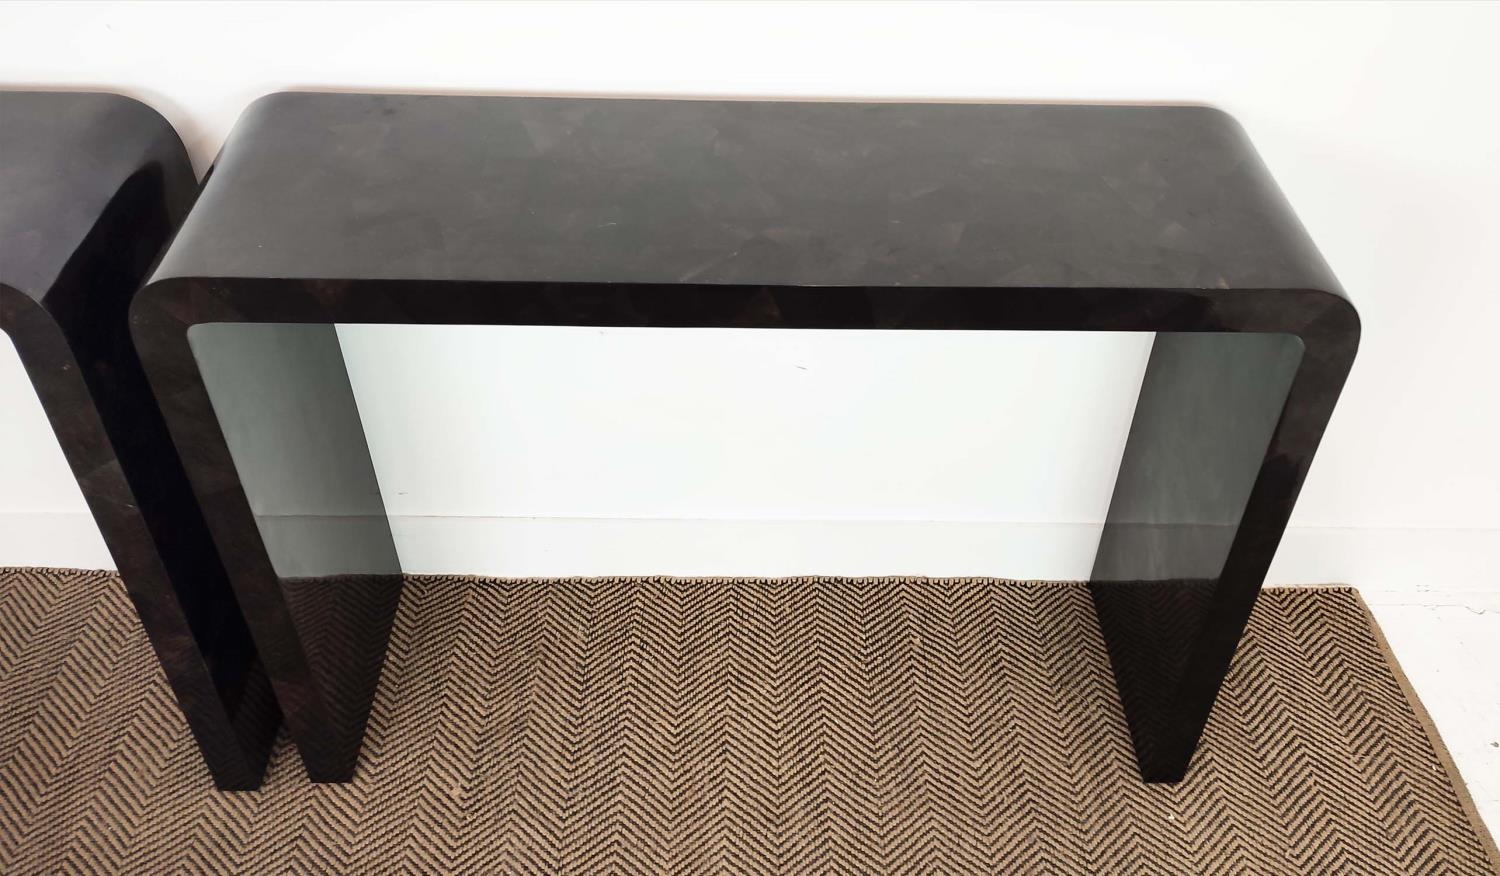 CONSOLE TABLES, a pair, black lacquered tessellated design, 83cm H x 120cm W x 35cm D. (2) - Image 2 of 5